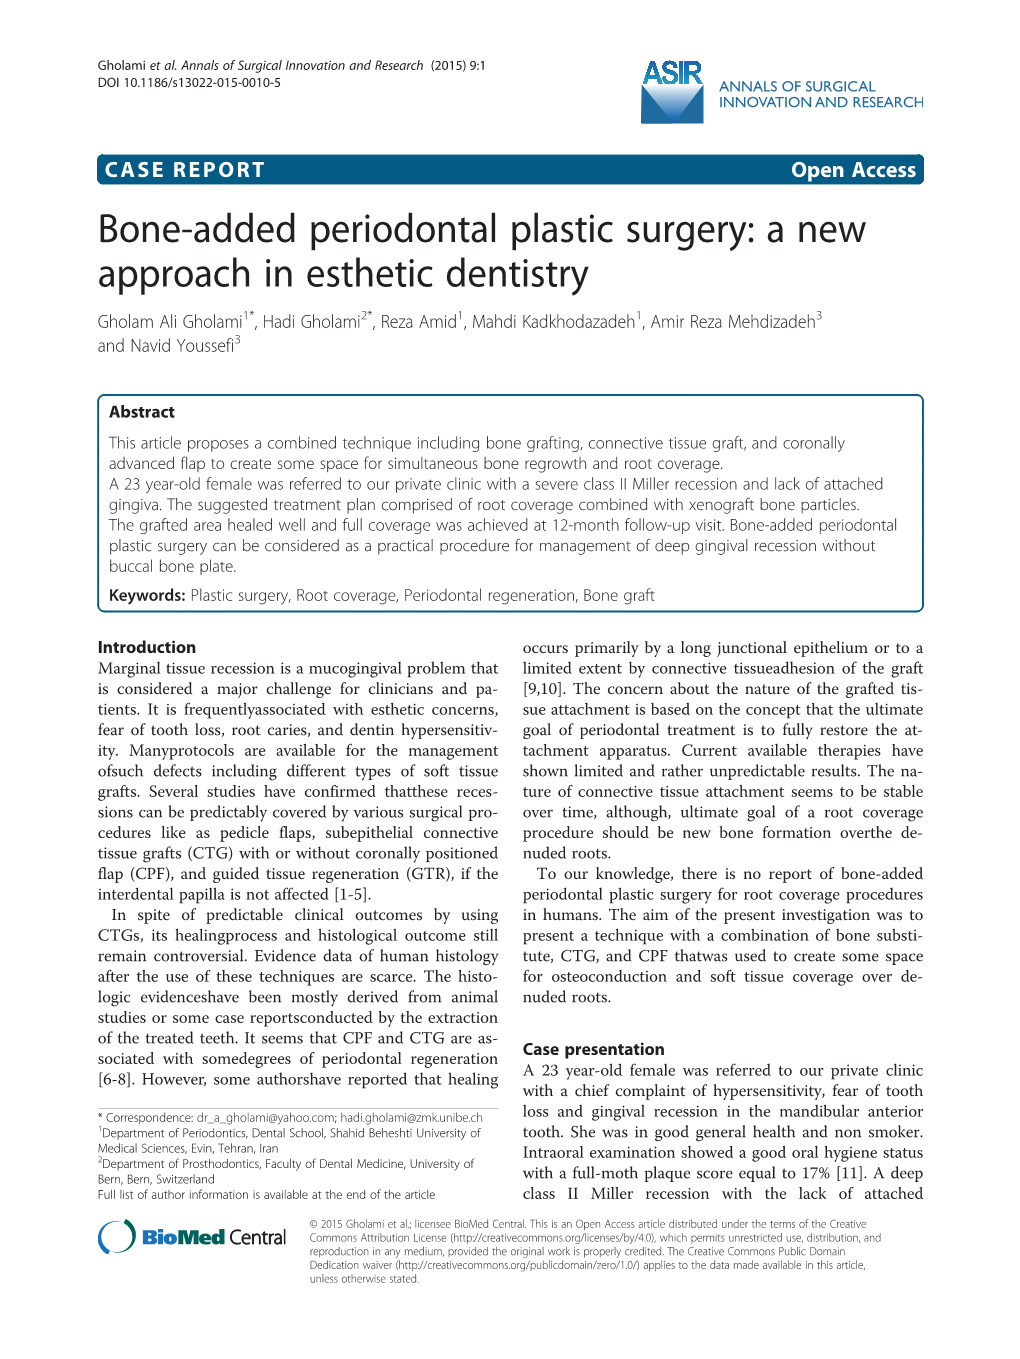 Bone-Added Periodontal Plastic Surgery: a New Approach in Esthetic